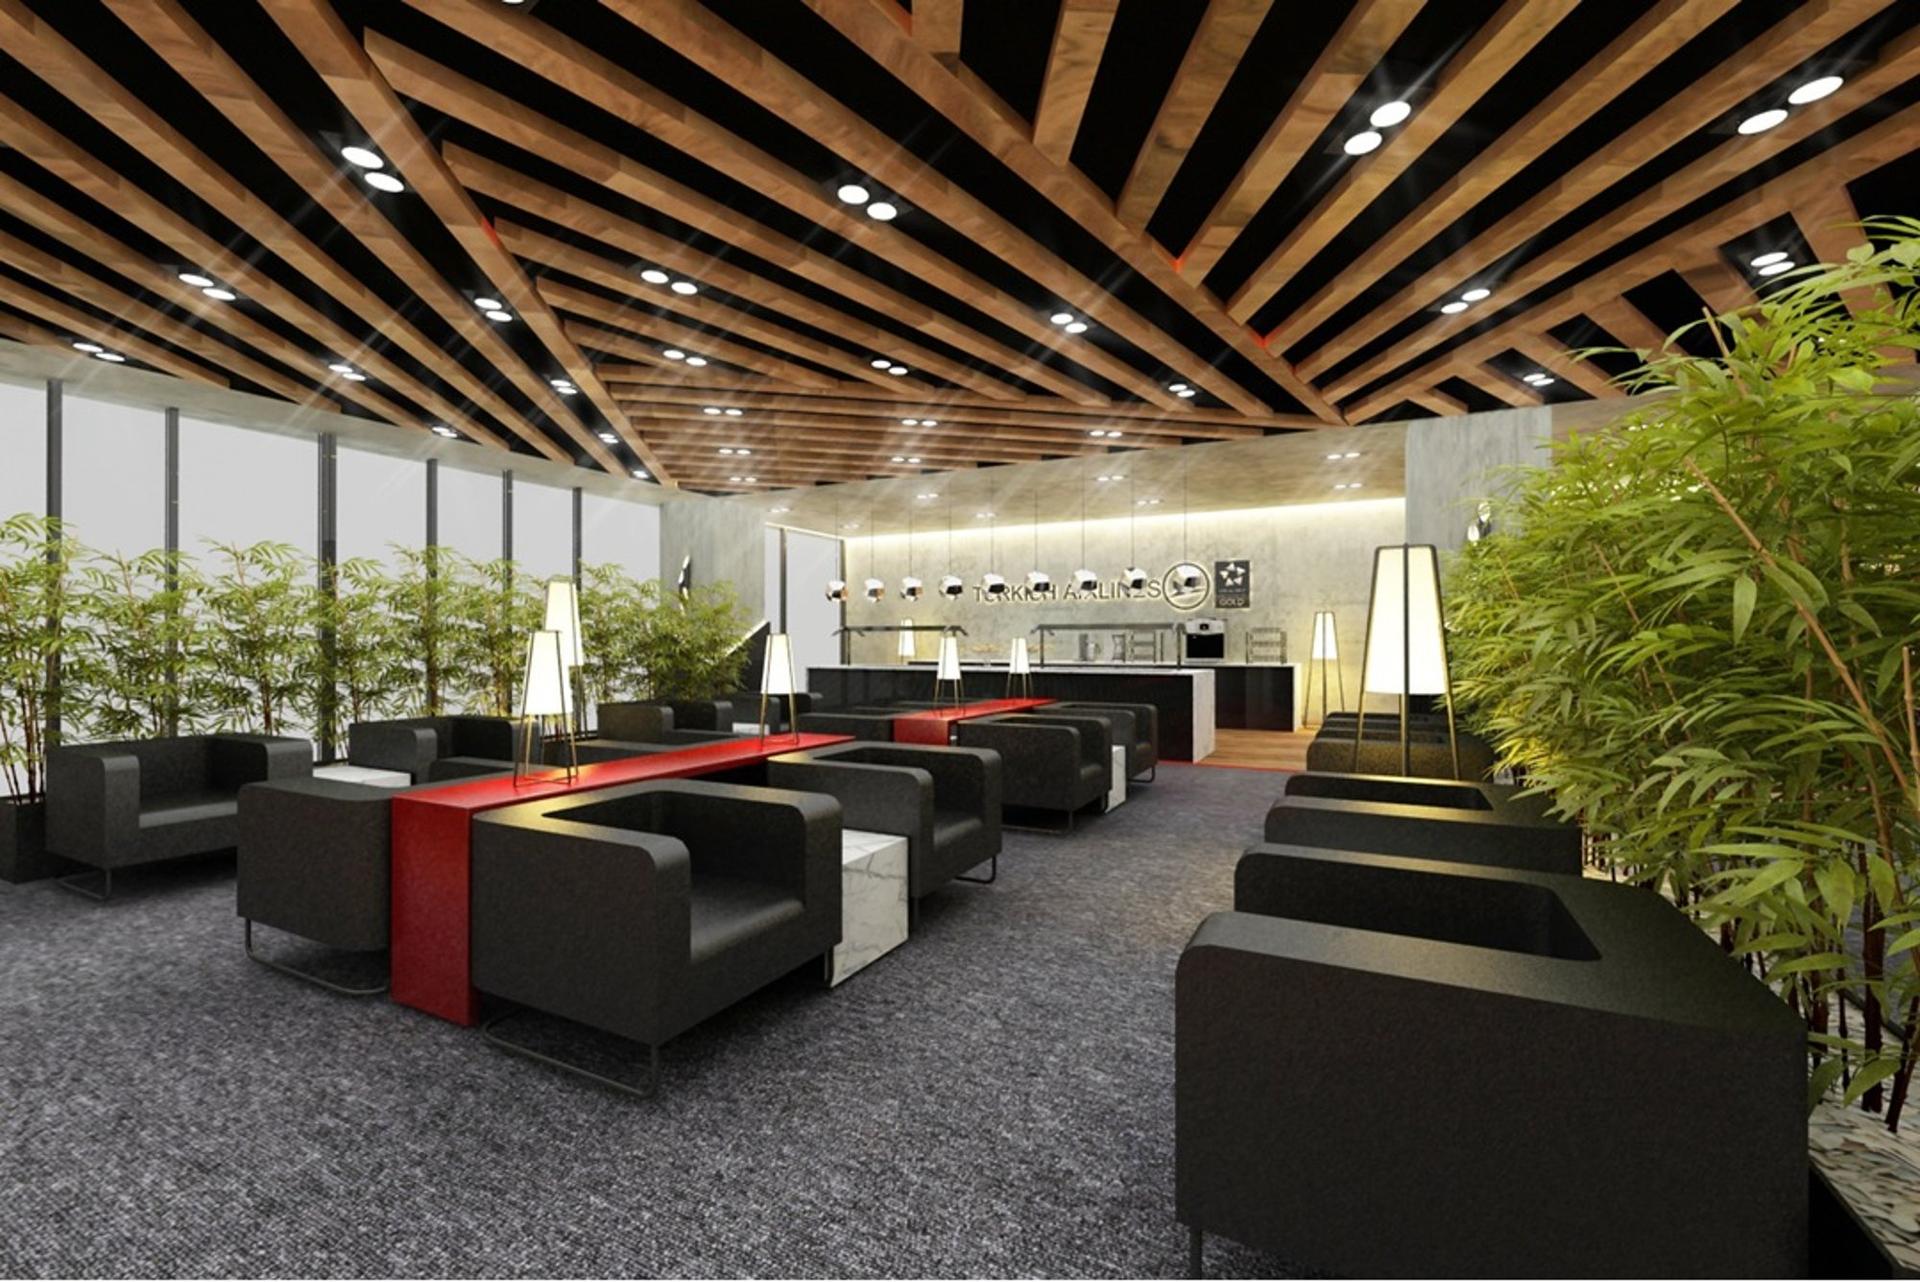 Turkish Airlines CIP Lounge (Business Lounge) image 6 of 27